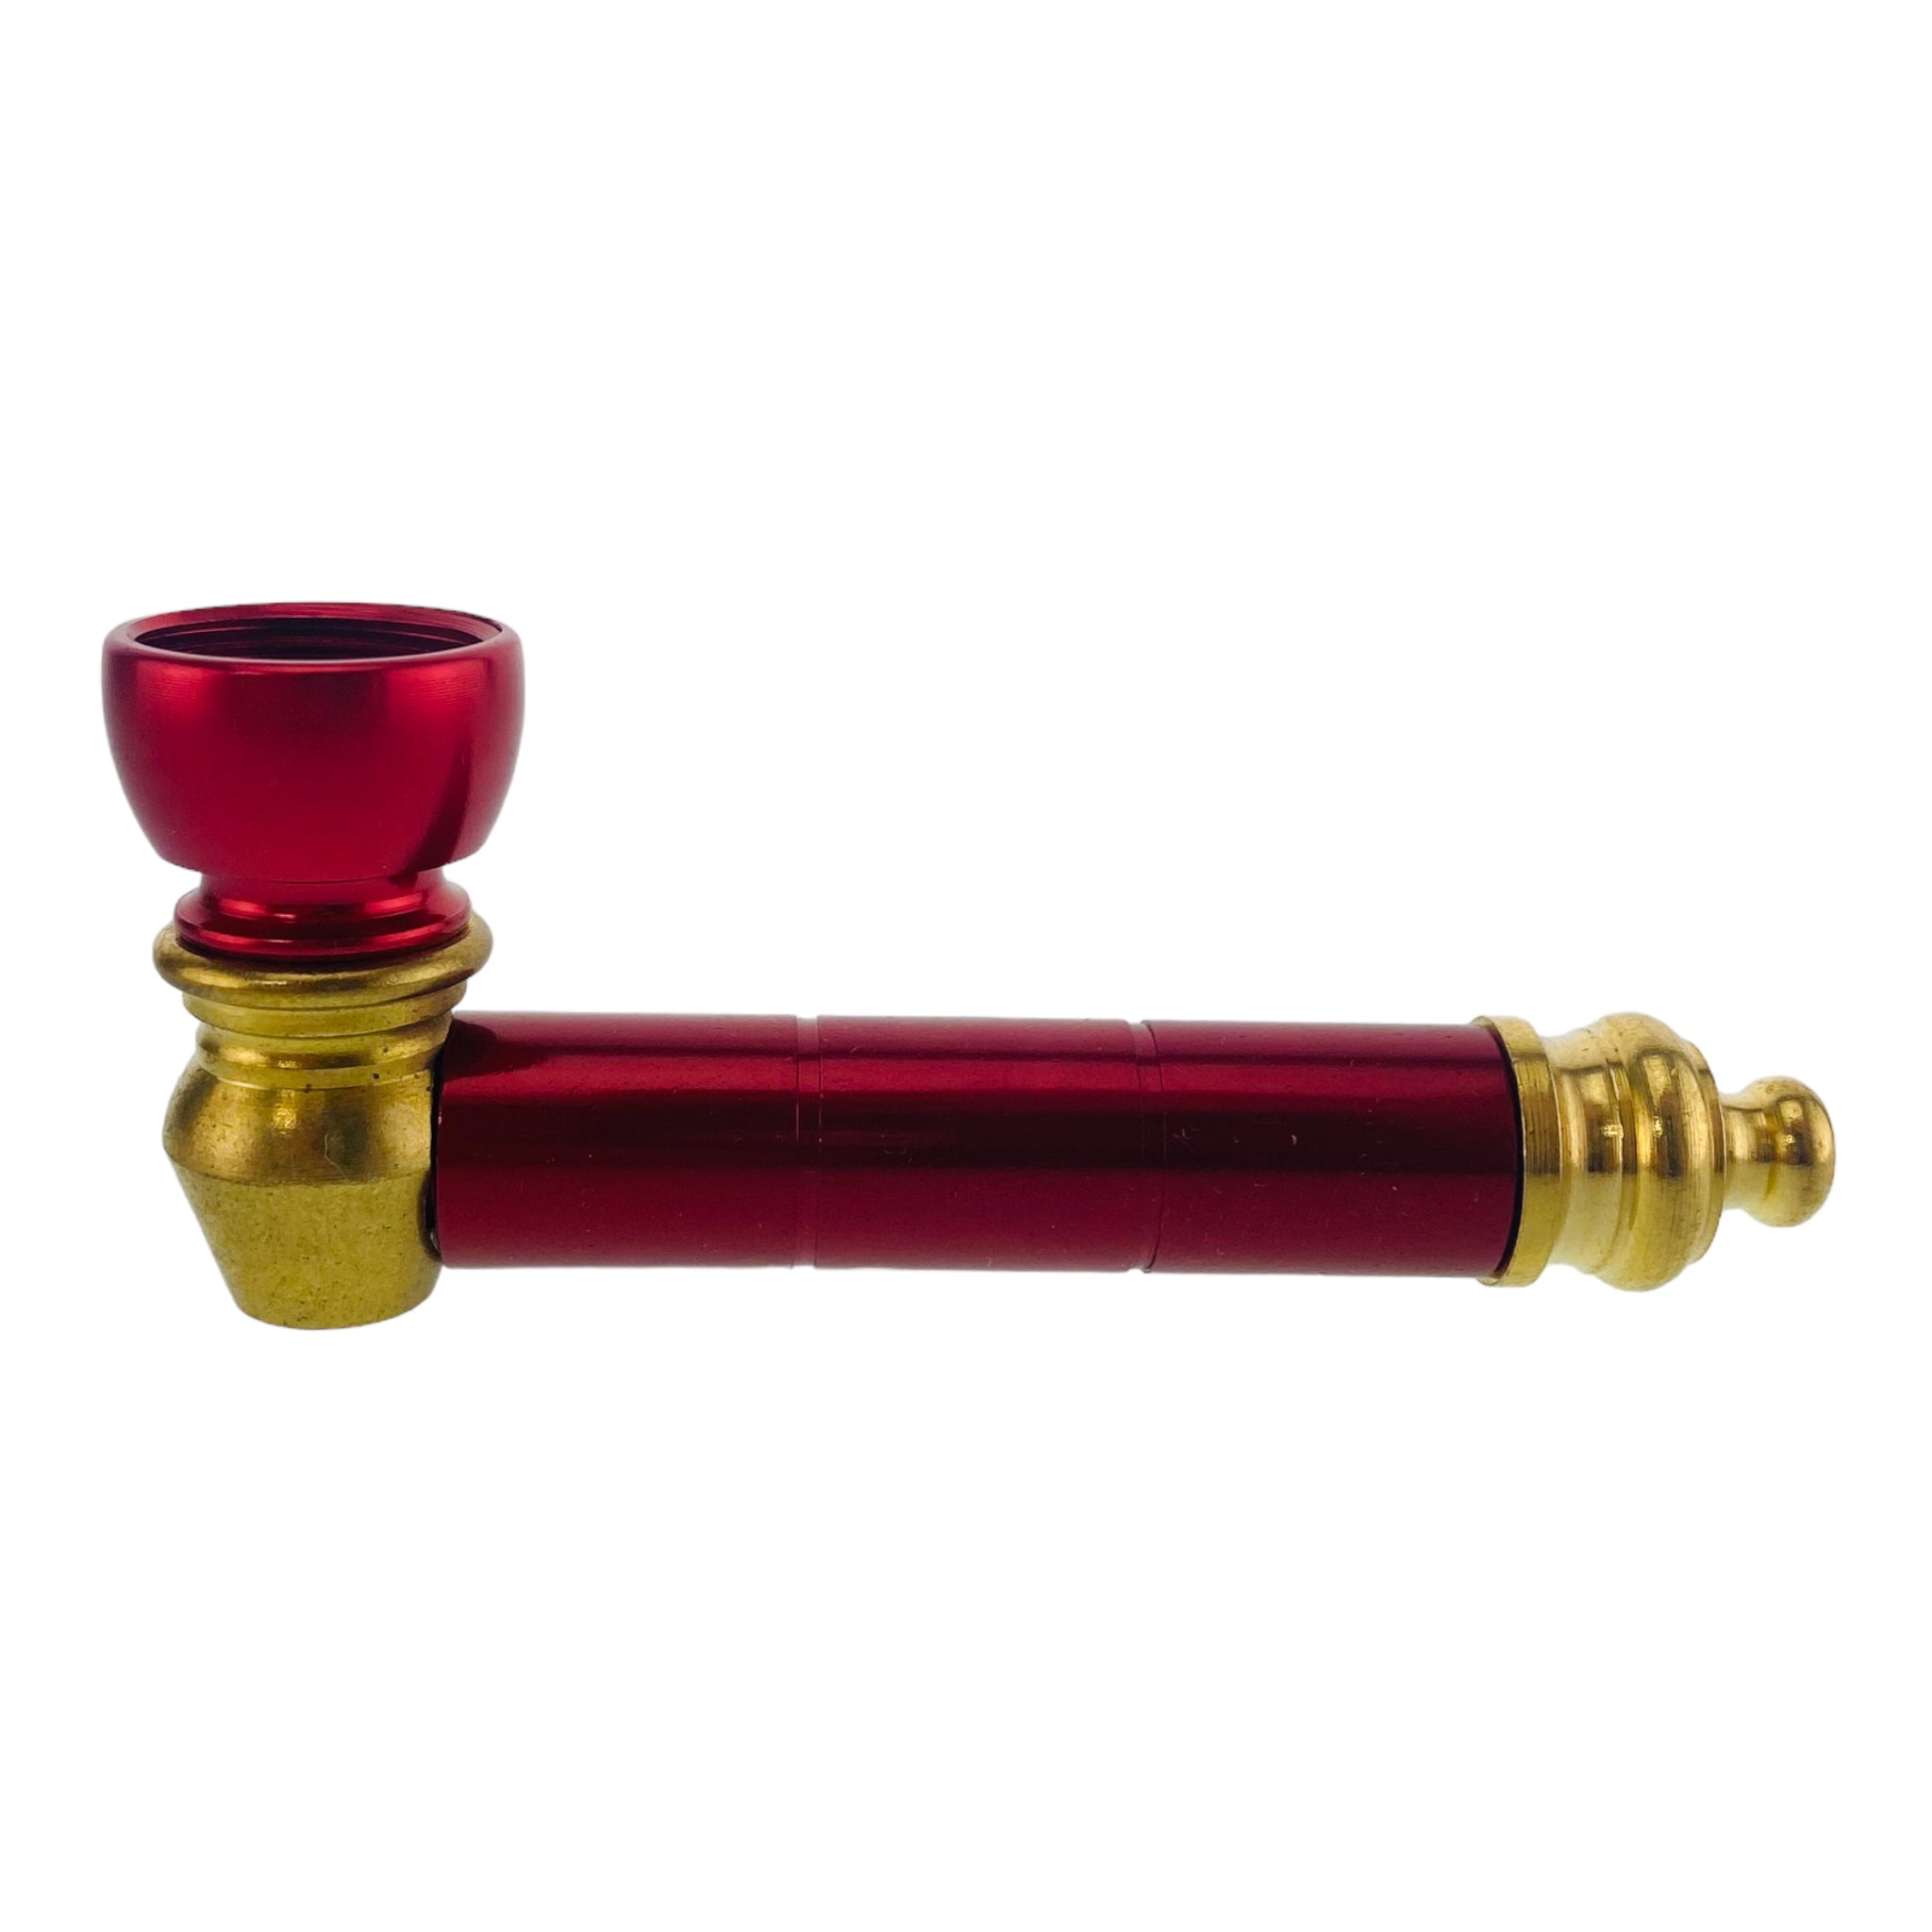 Metal Hand Pipes - Red & Gold Basic Aluminum And Brass Metal Pipe With Small Chamber